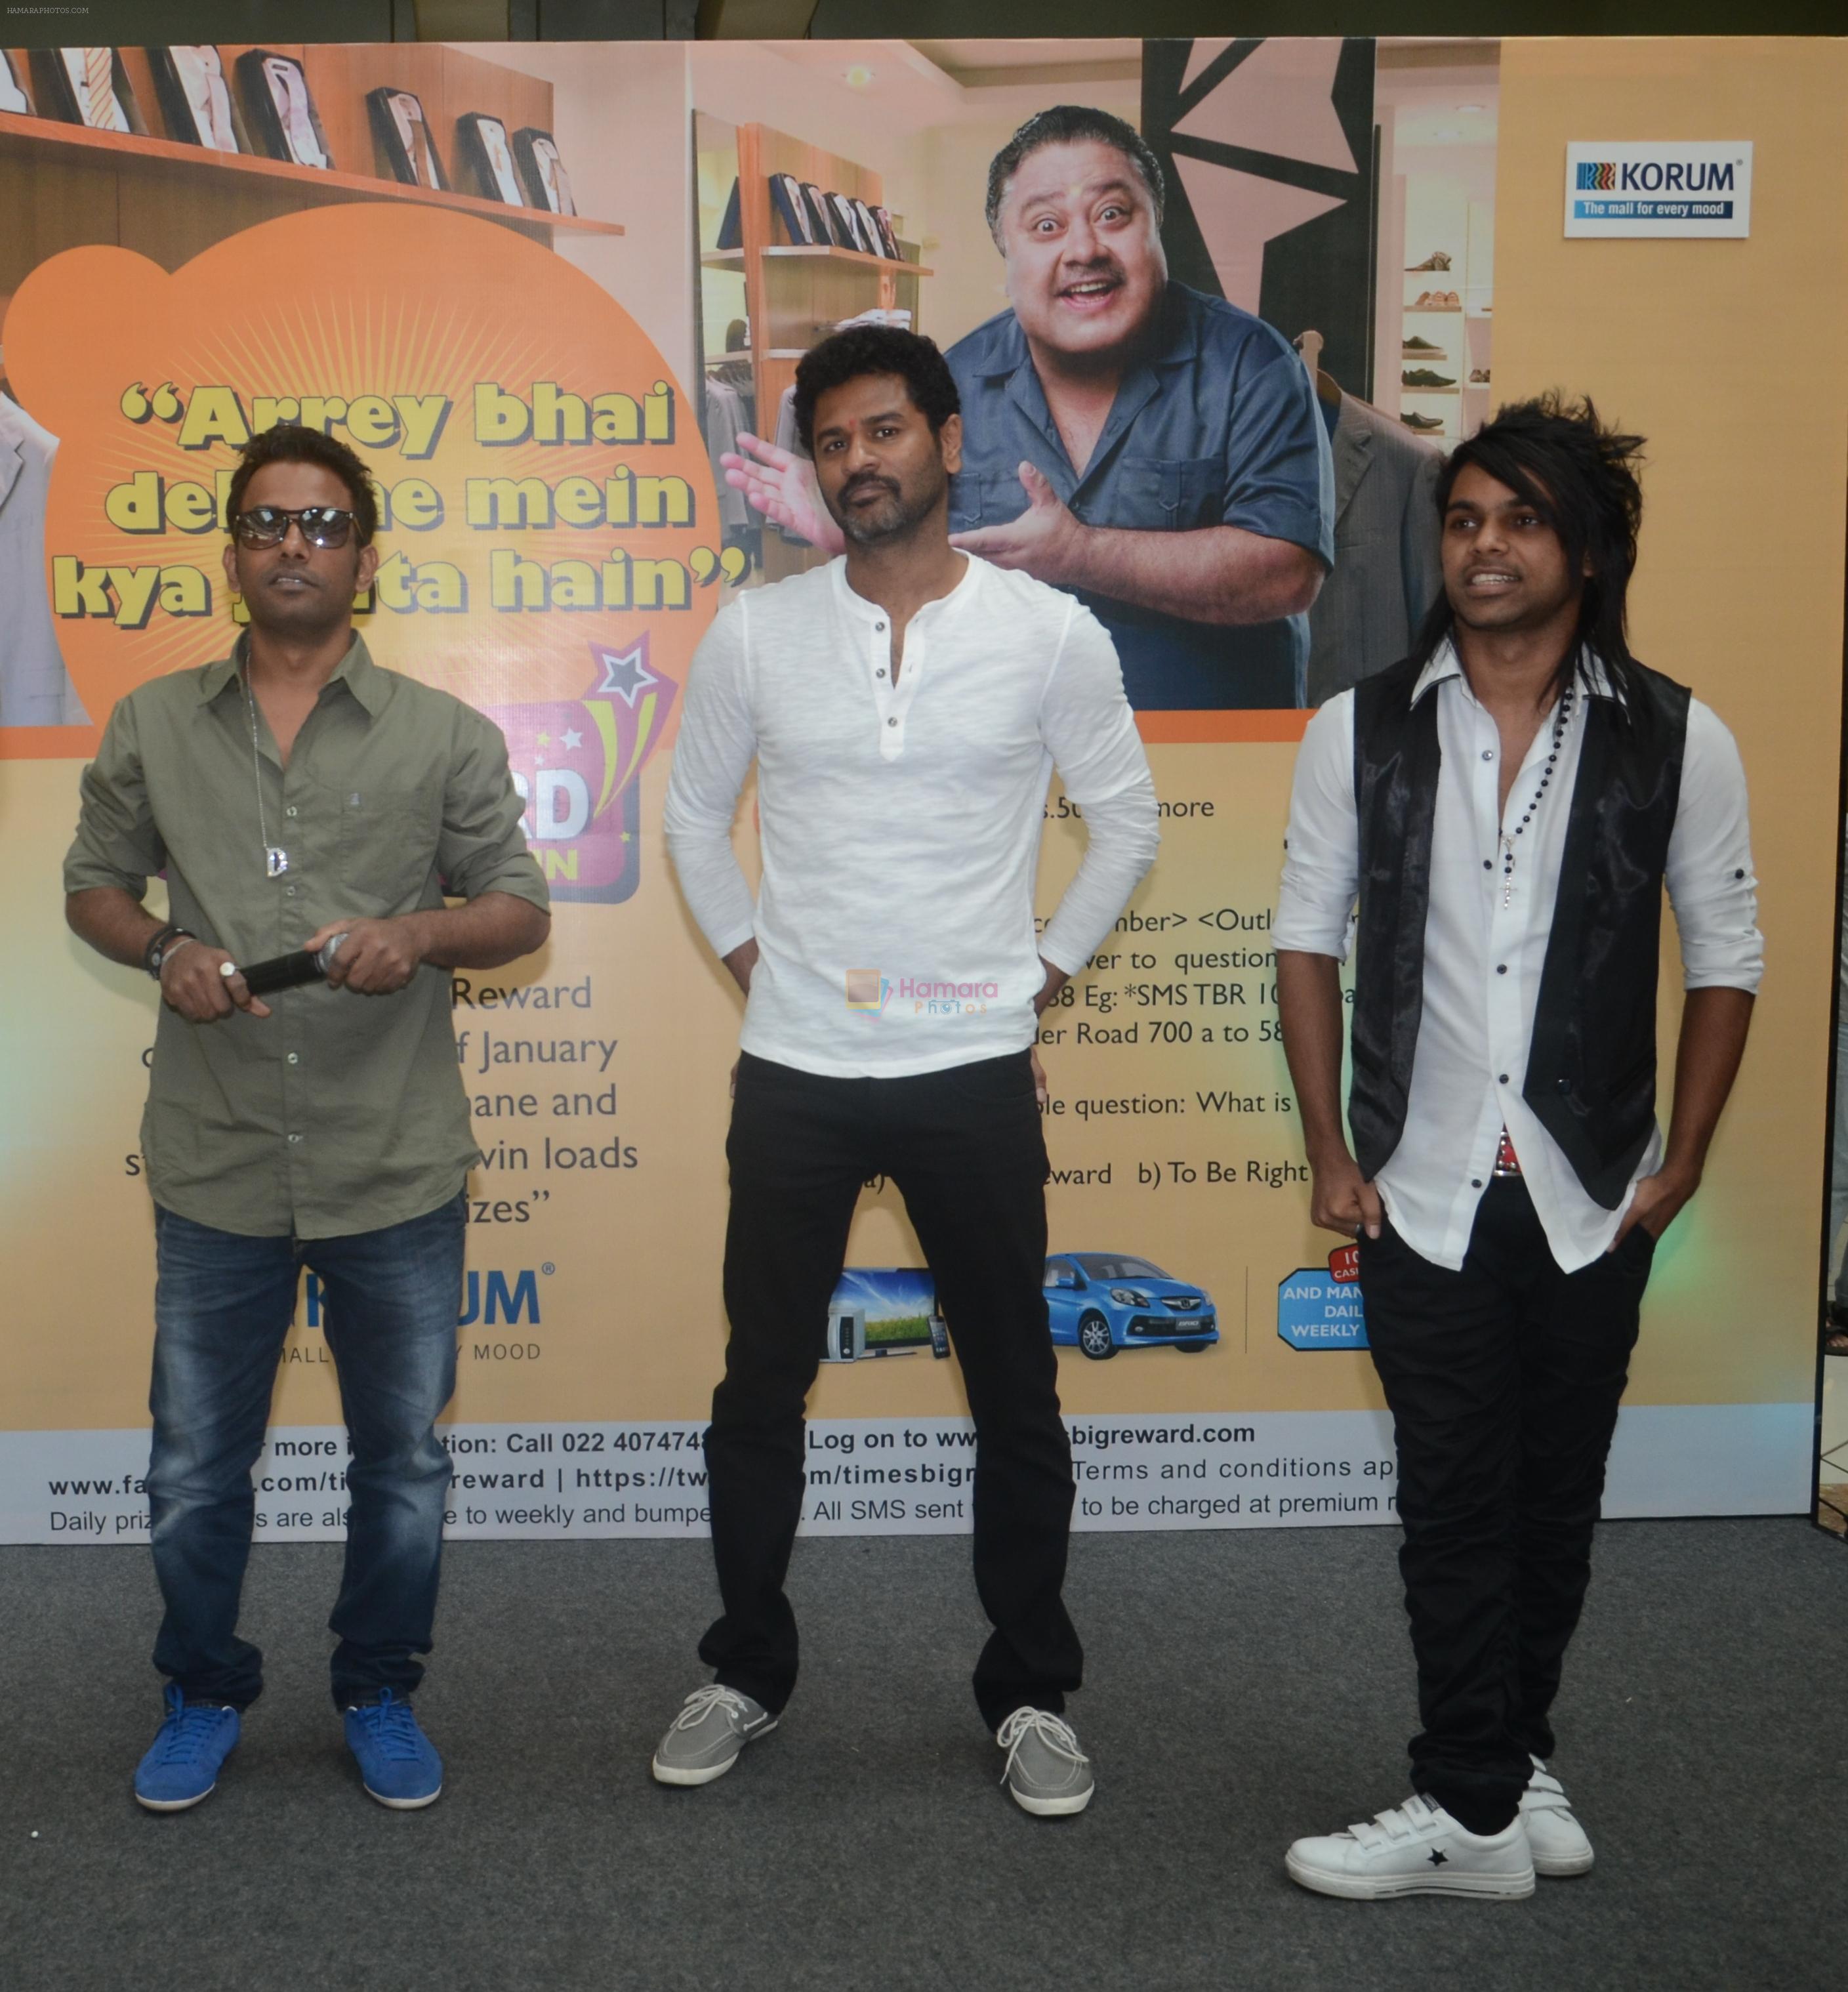 Dharmesh, Prabhudeva and Prince promoting their movie Any Body Can Dance at the Times Big Reward Award Ceremony held at Korum Mall